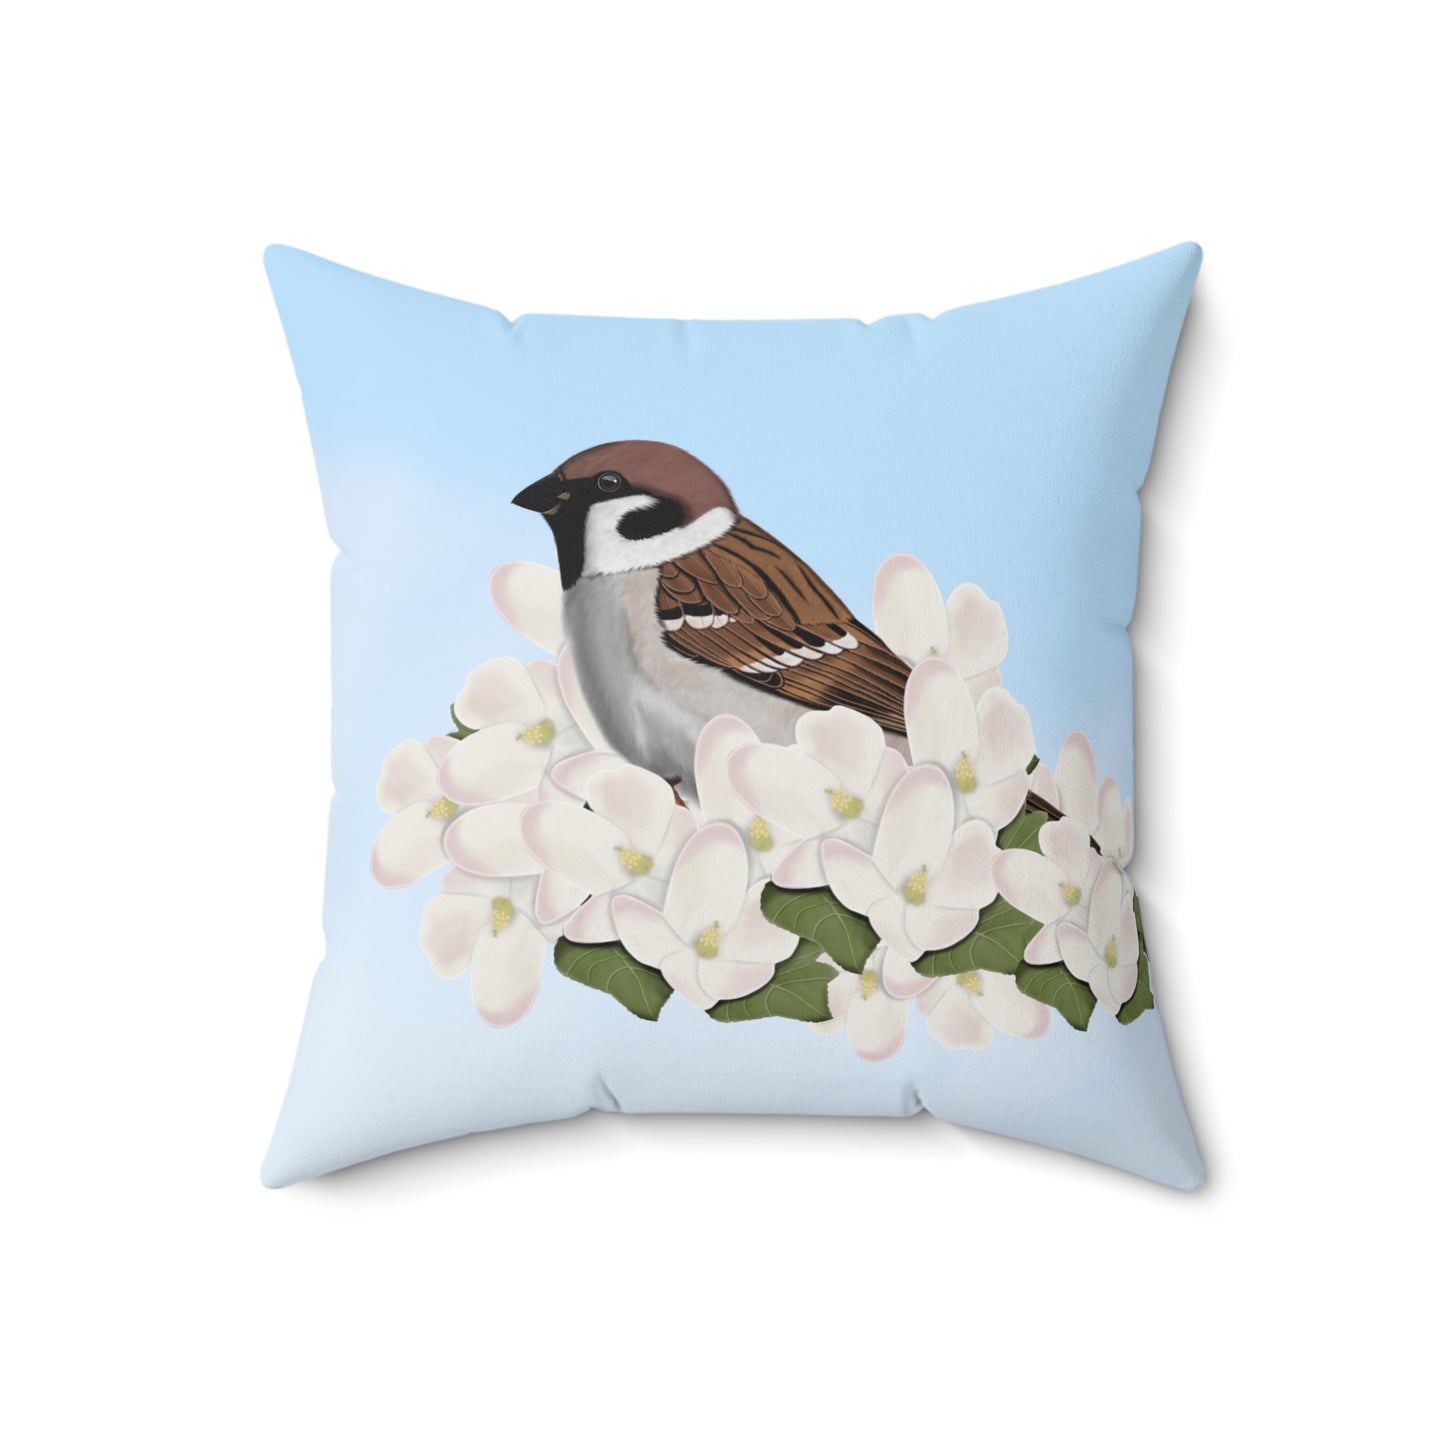 Sparrow and Apple Blossoms Bird Throw Pillow 18"x18"